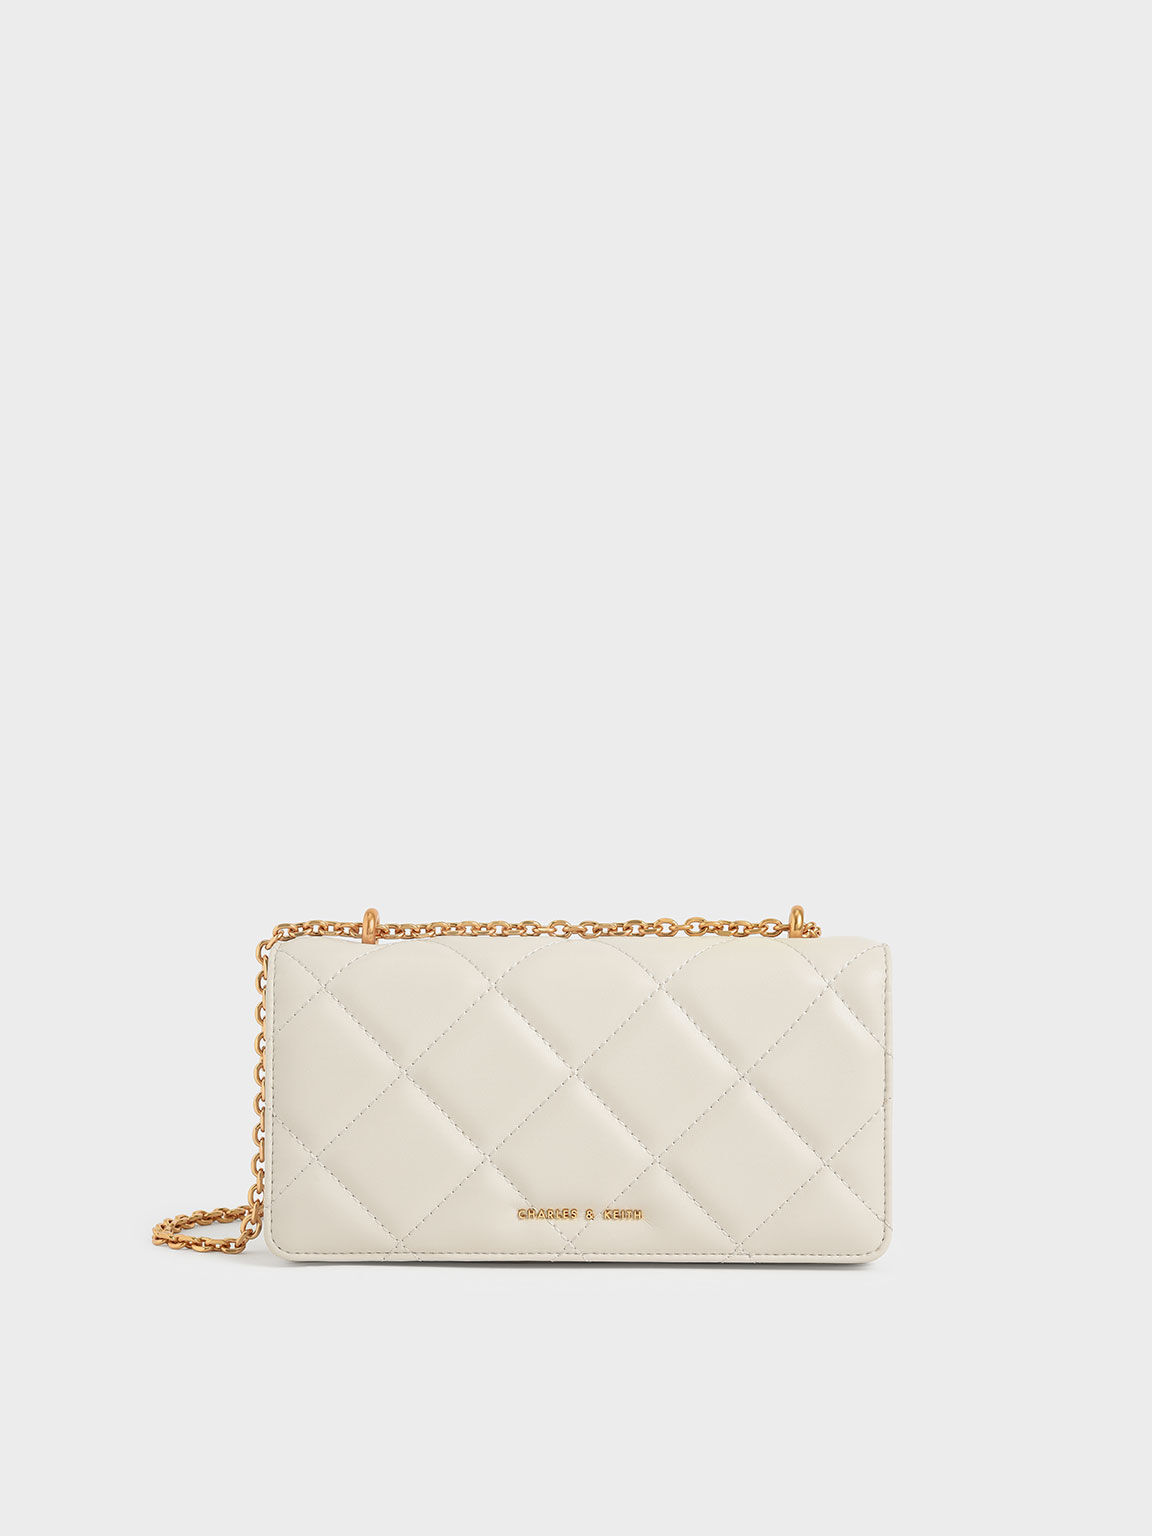 Find amazing products in Women's Wallets' today